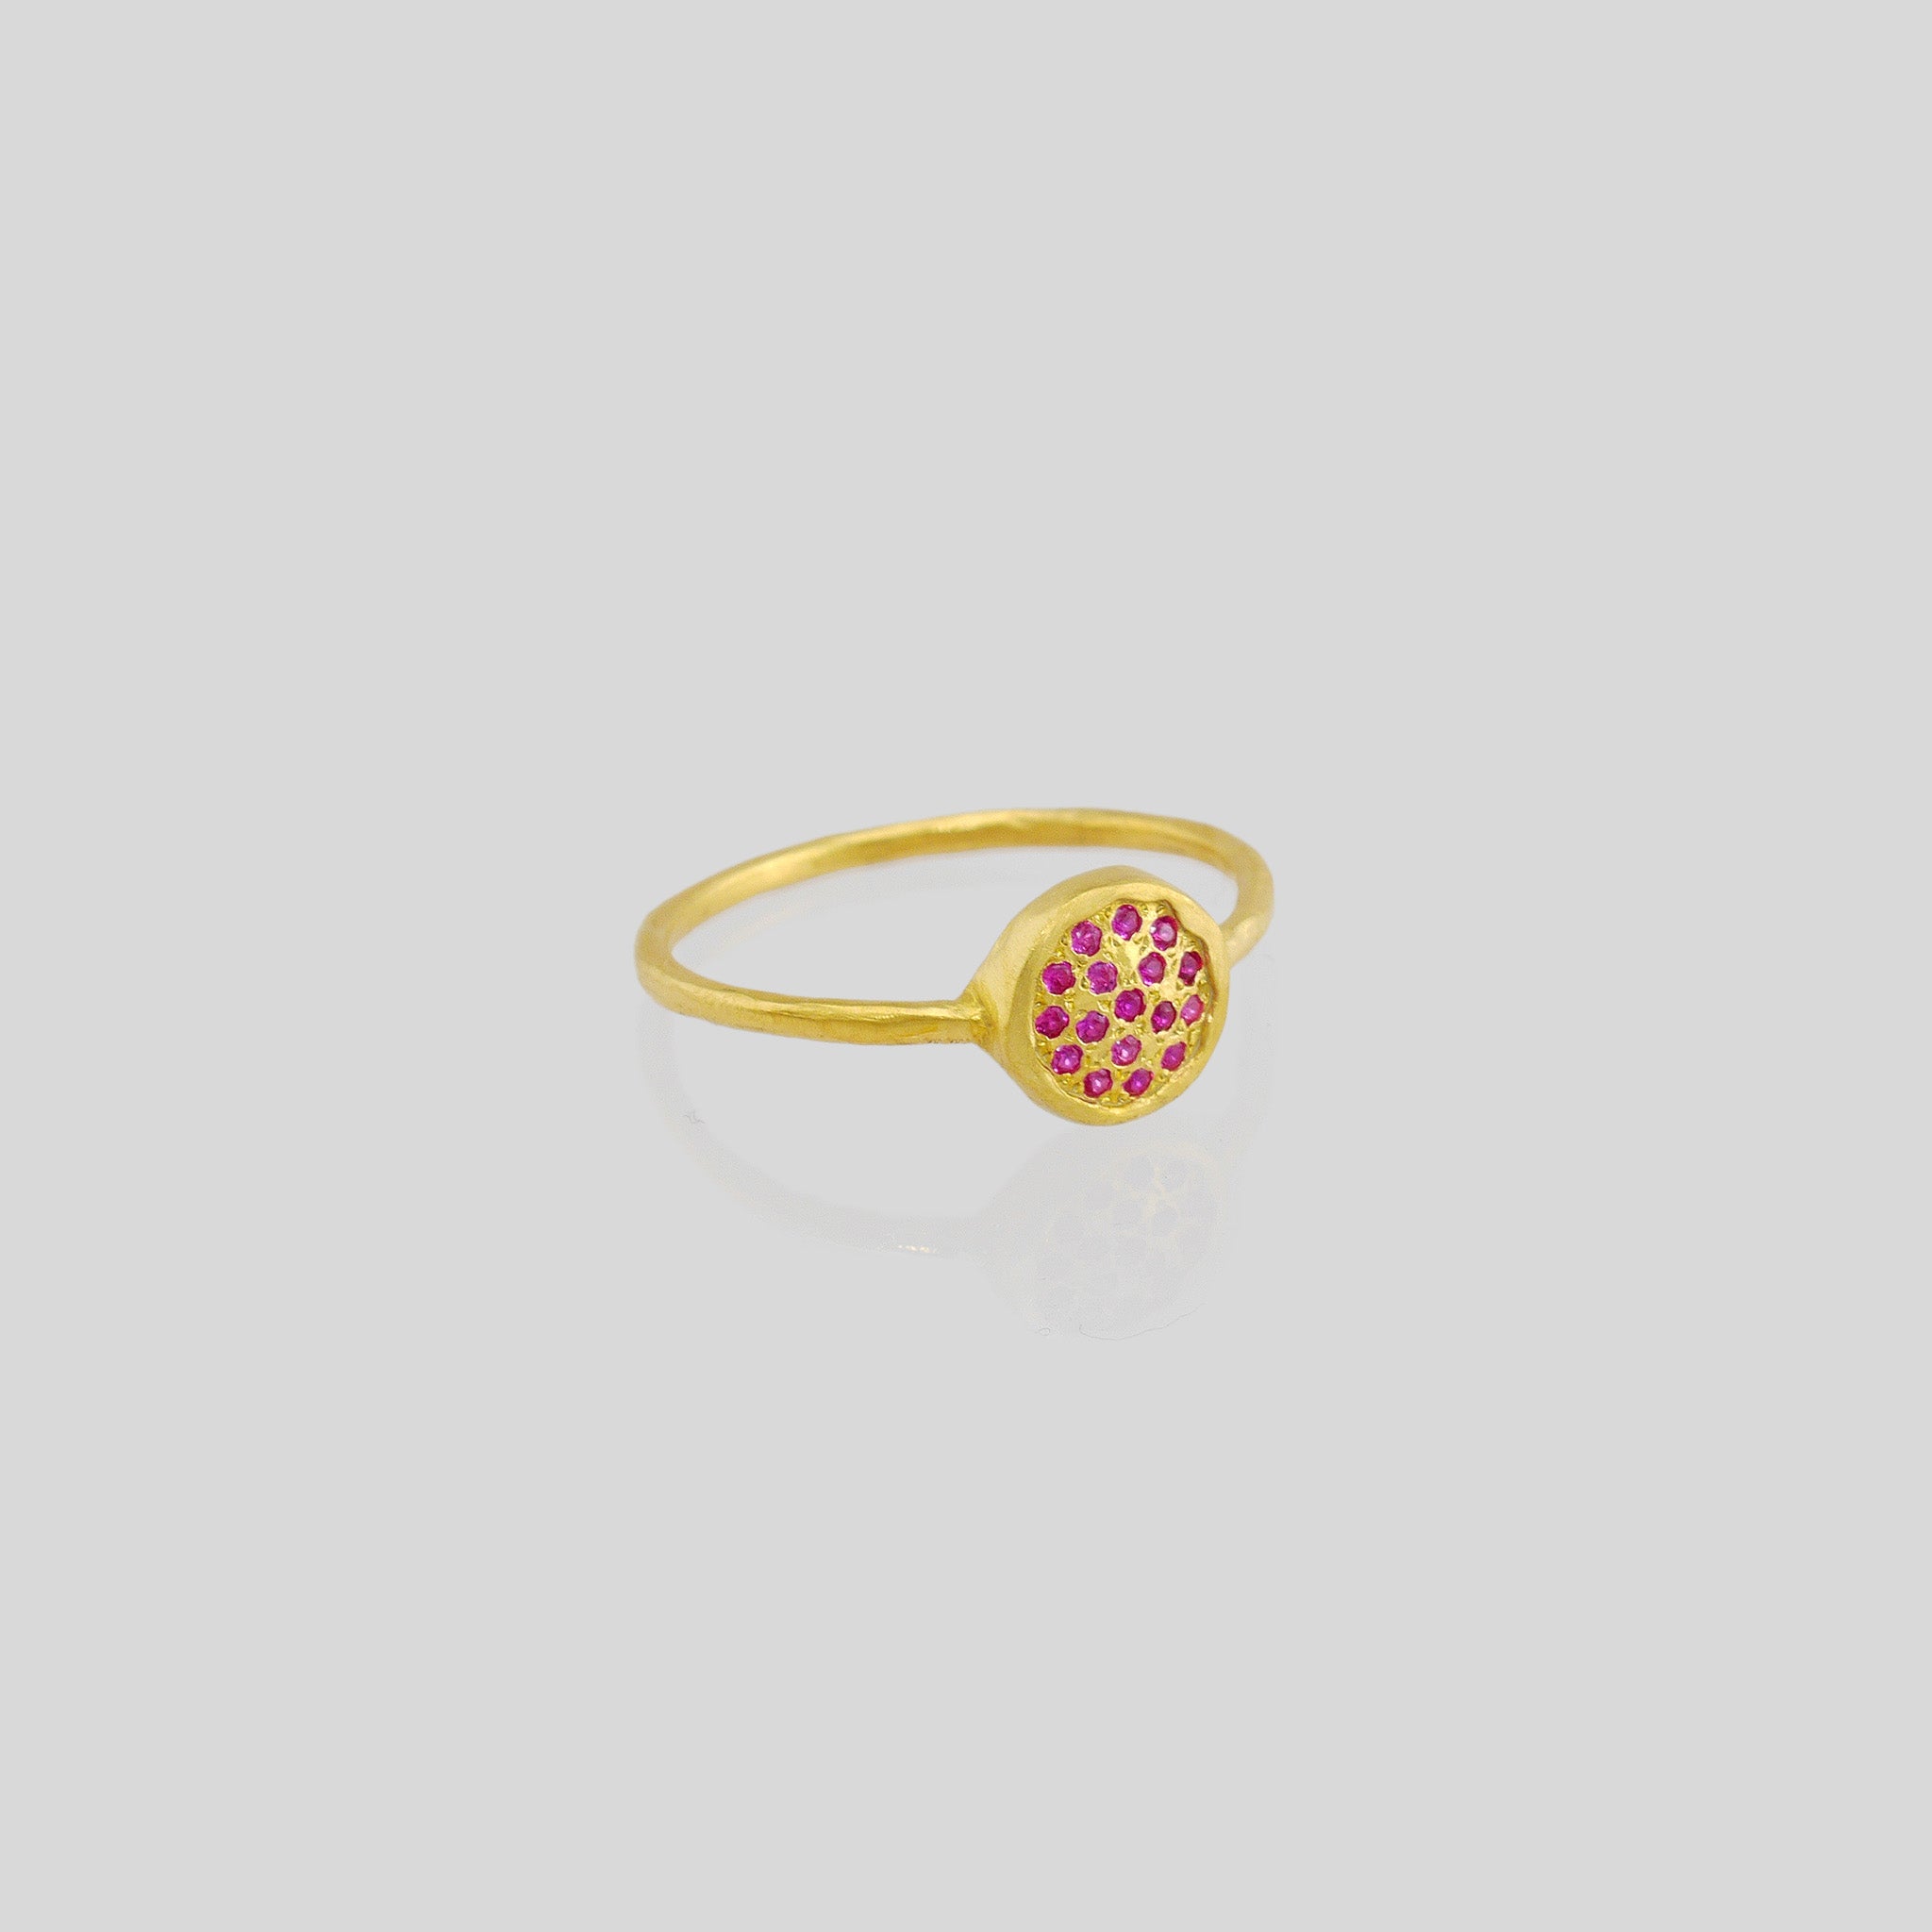 Delicate hand-made gold ring with a circular plate set with tiny Ruby gemstones. The sparkle from the stones resembles a starry night.